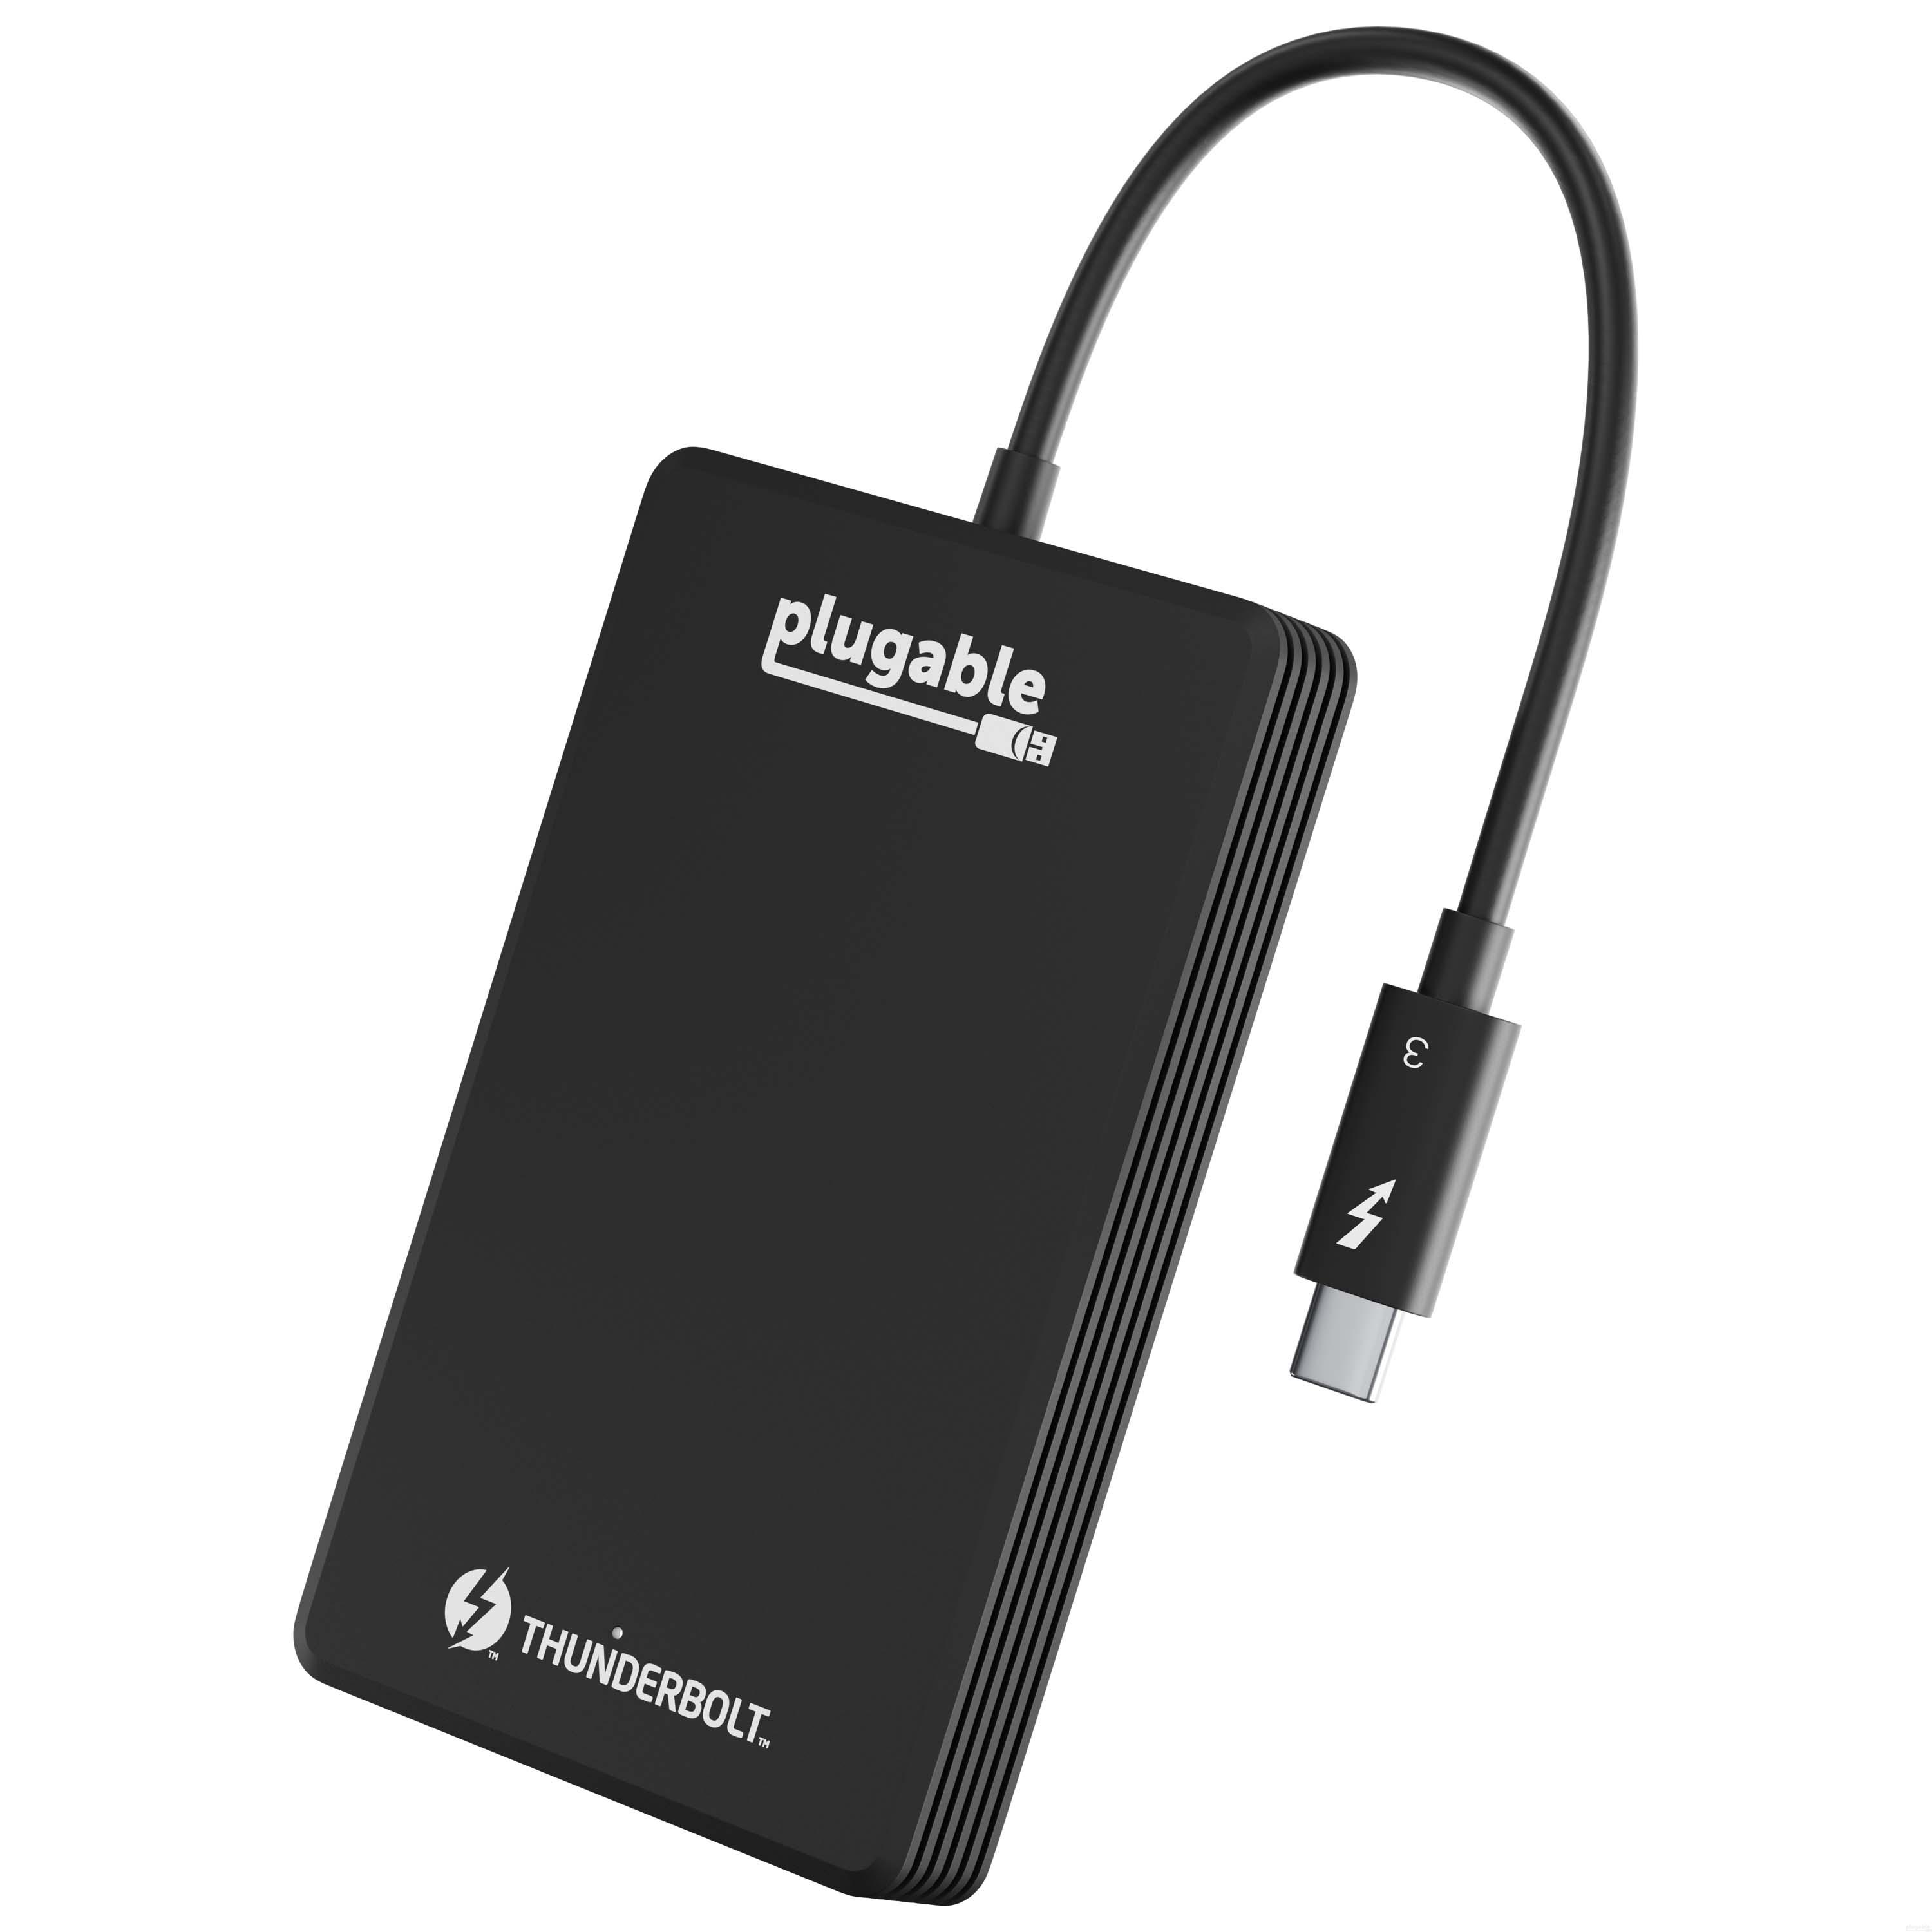 Plugable 512GB Thunderbolt 3 External SSD NVMe Drive (Up to 2400MBs/1800MBs R/W) - image 1 of 8